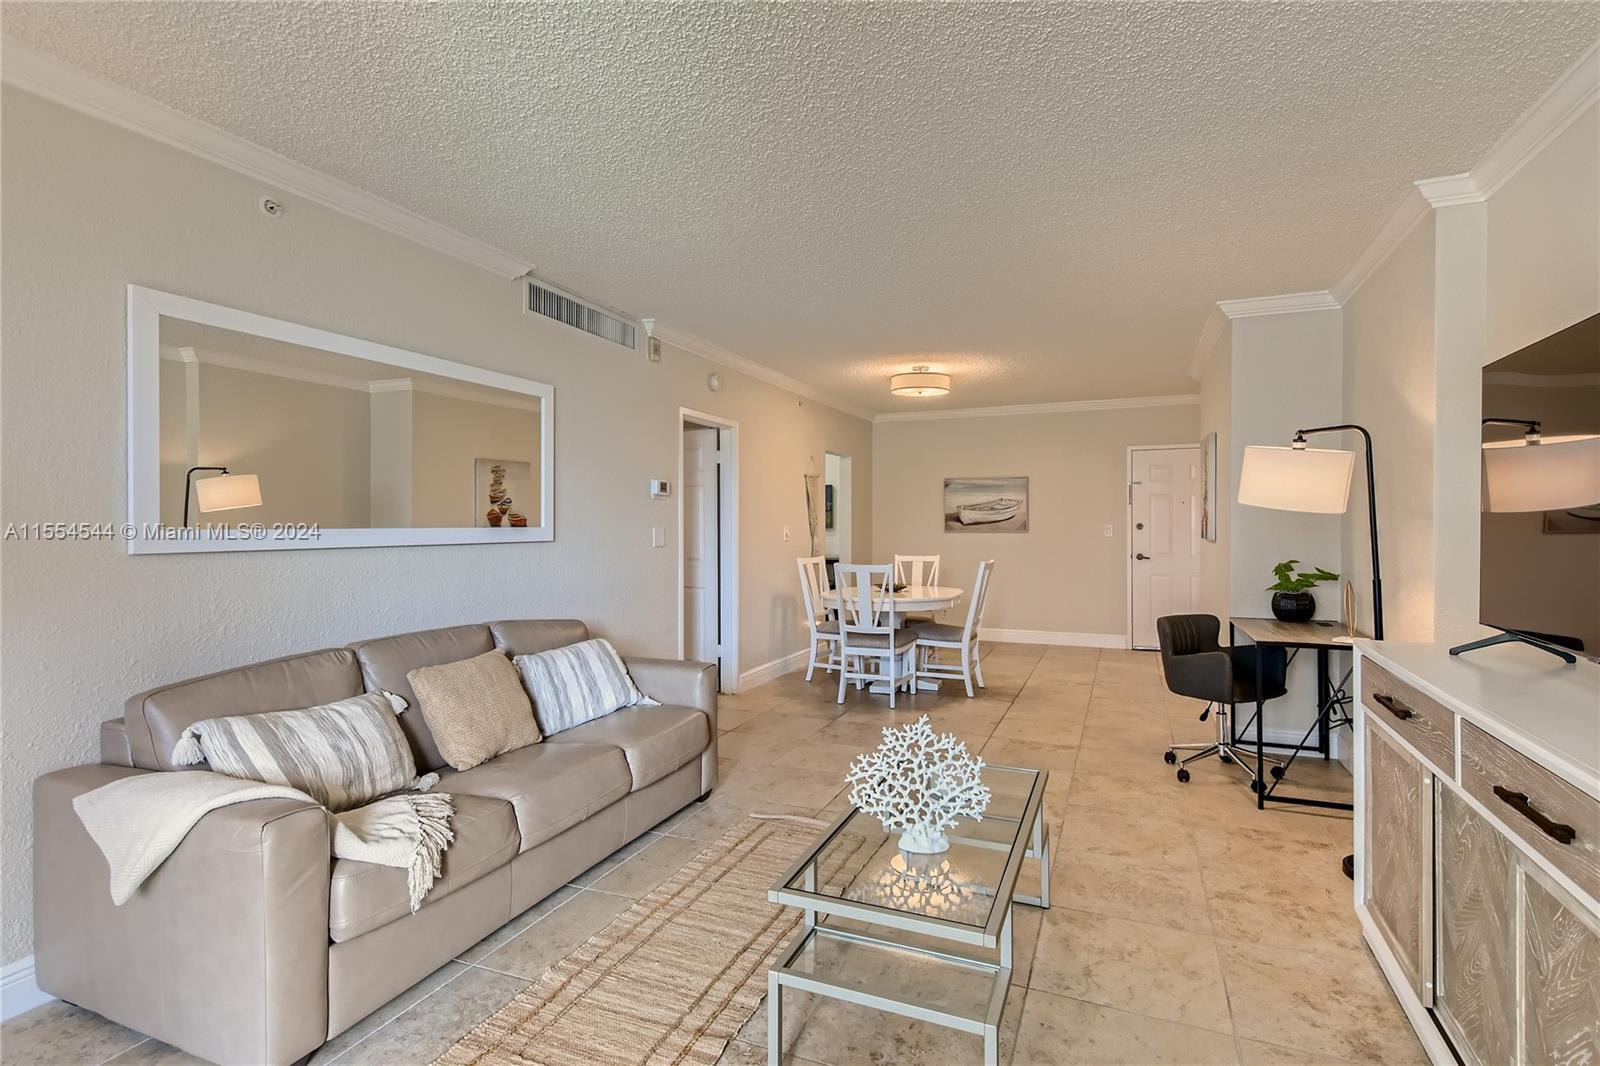 Photo of 2501 S Ocean Dr #316 (Available June) in Hollywood, FL